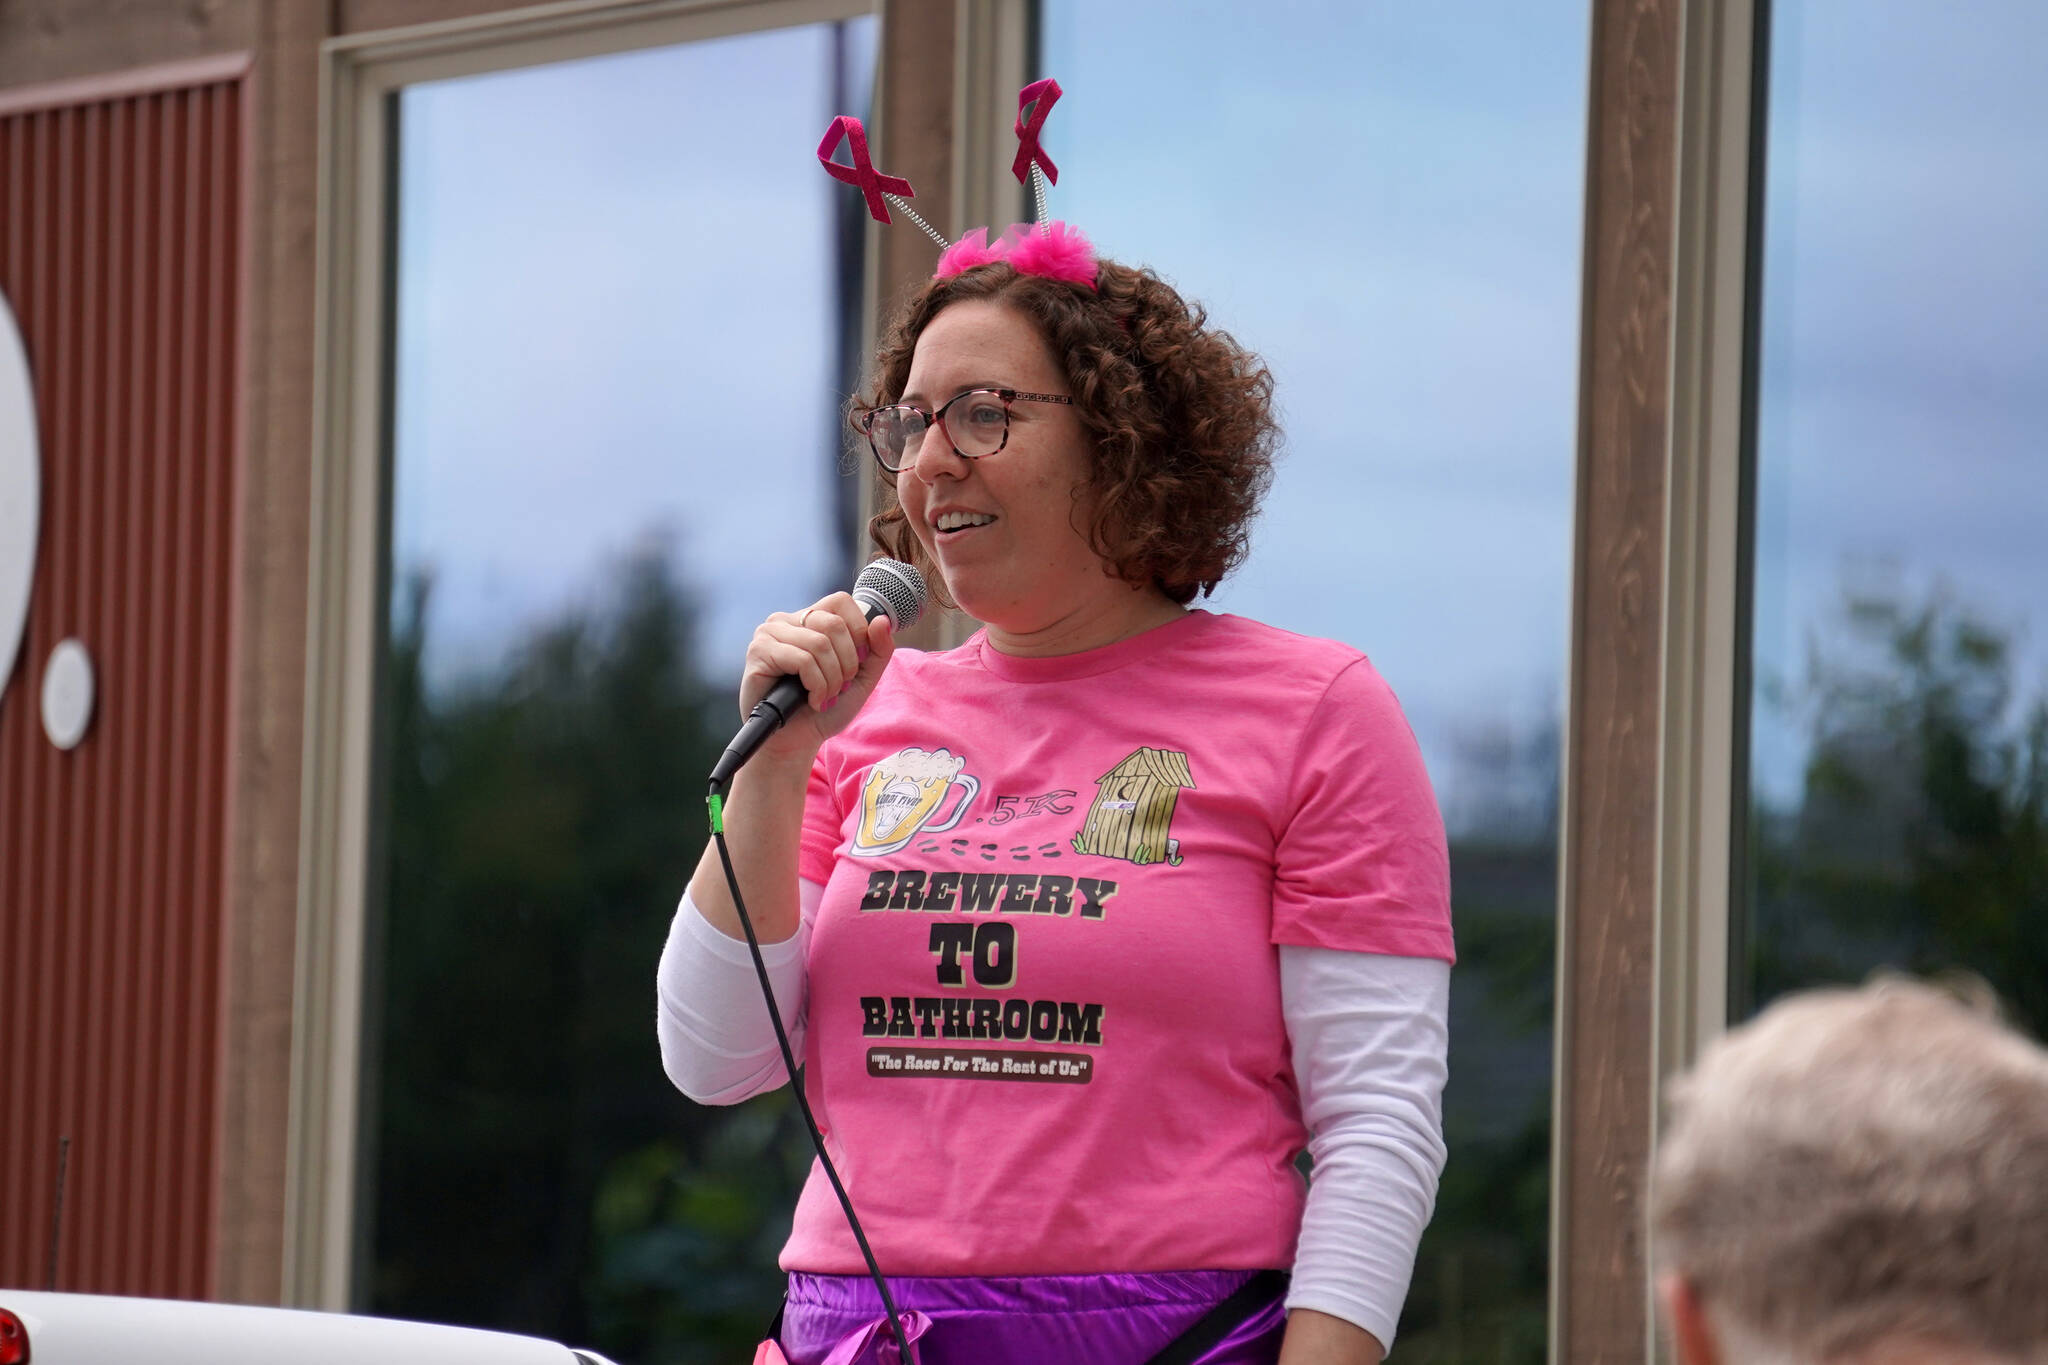 Alana Martin speaks before the start of the Brewery to Bathroom .5K at Kenai River Brewing in Soldotna, Alaska, on Sunday, Aug. 13, 2023. (Jake Dye/Peninsula Clarion)